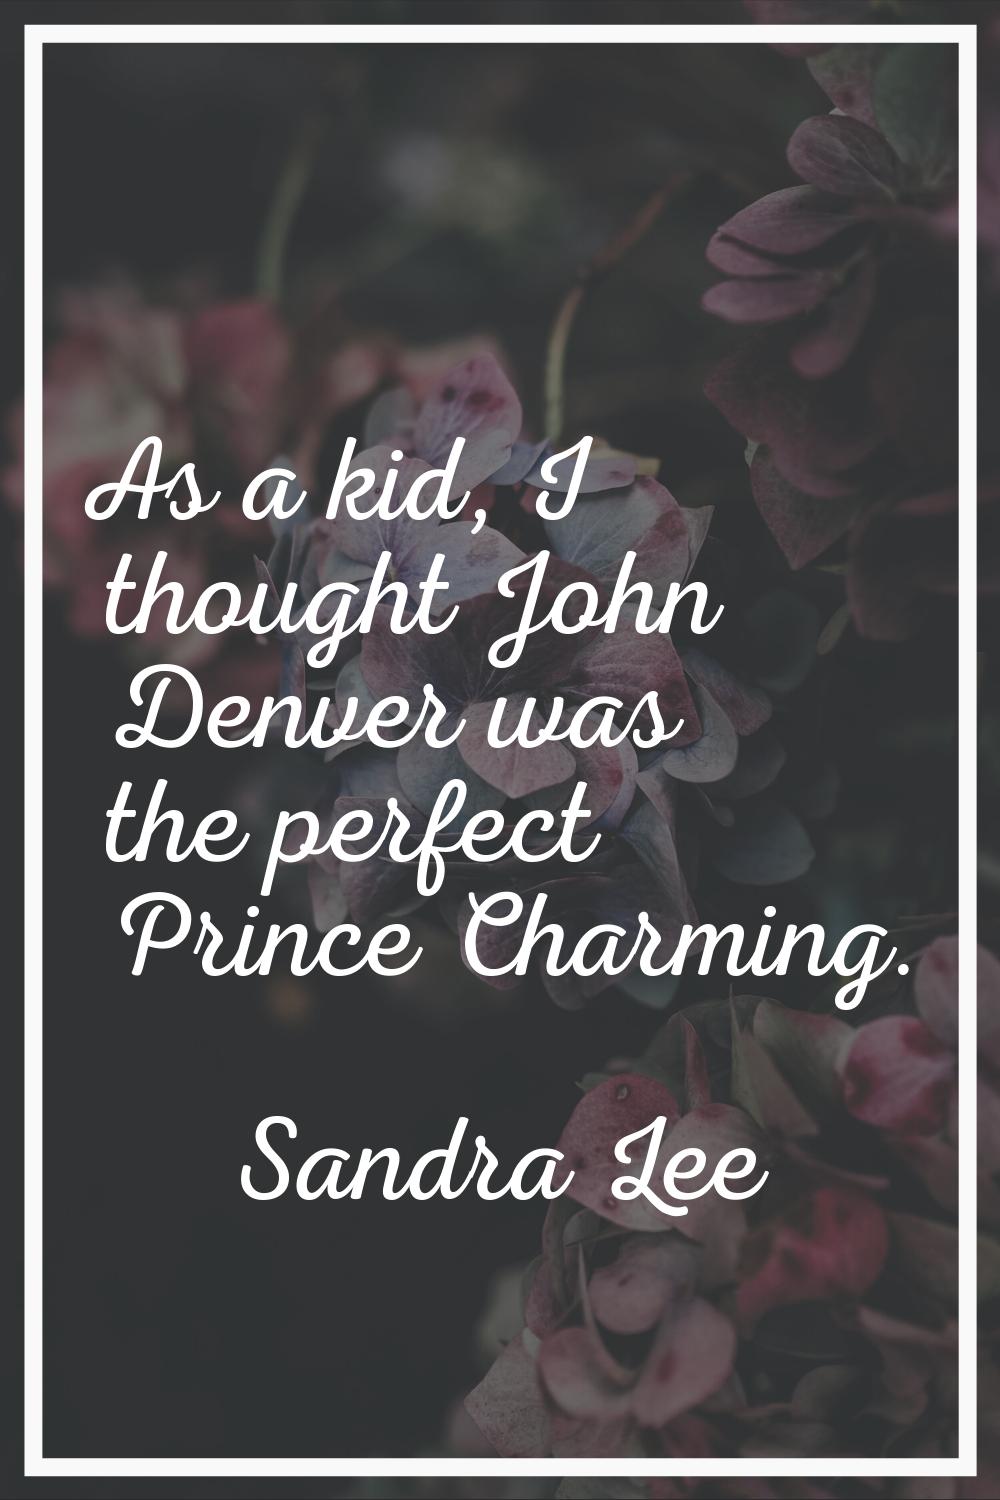 As a kid, I thought John Denver was the perfect Prince Charming.